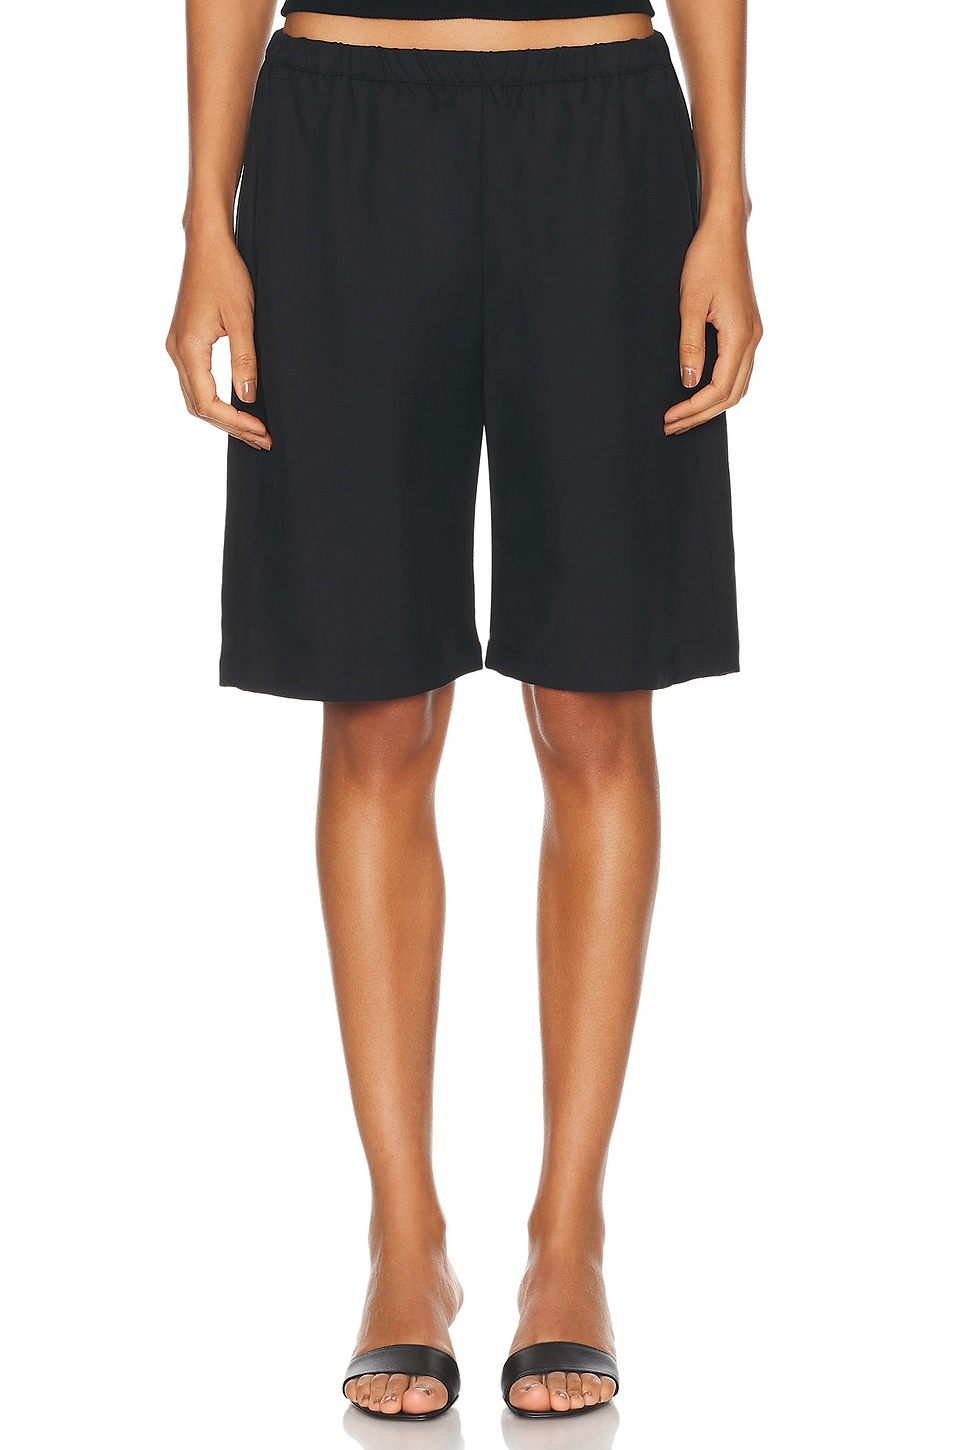 Image 1 of Enza Costa Twill Everywhere Short in Black